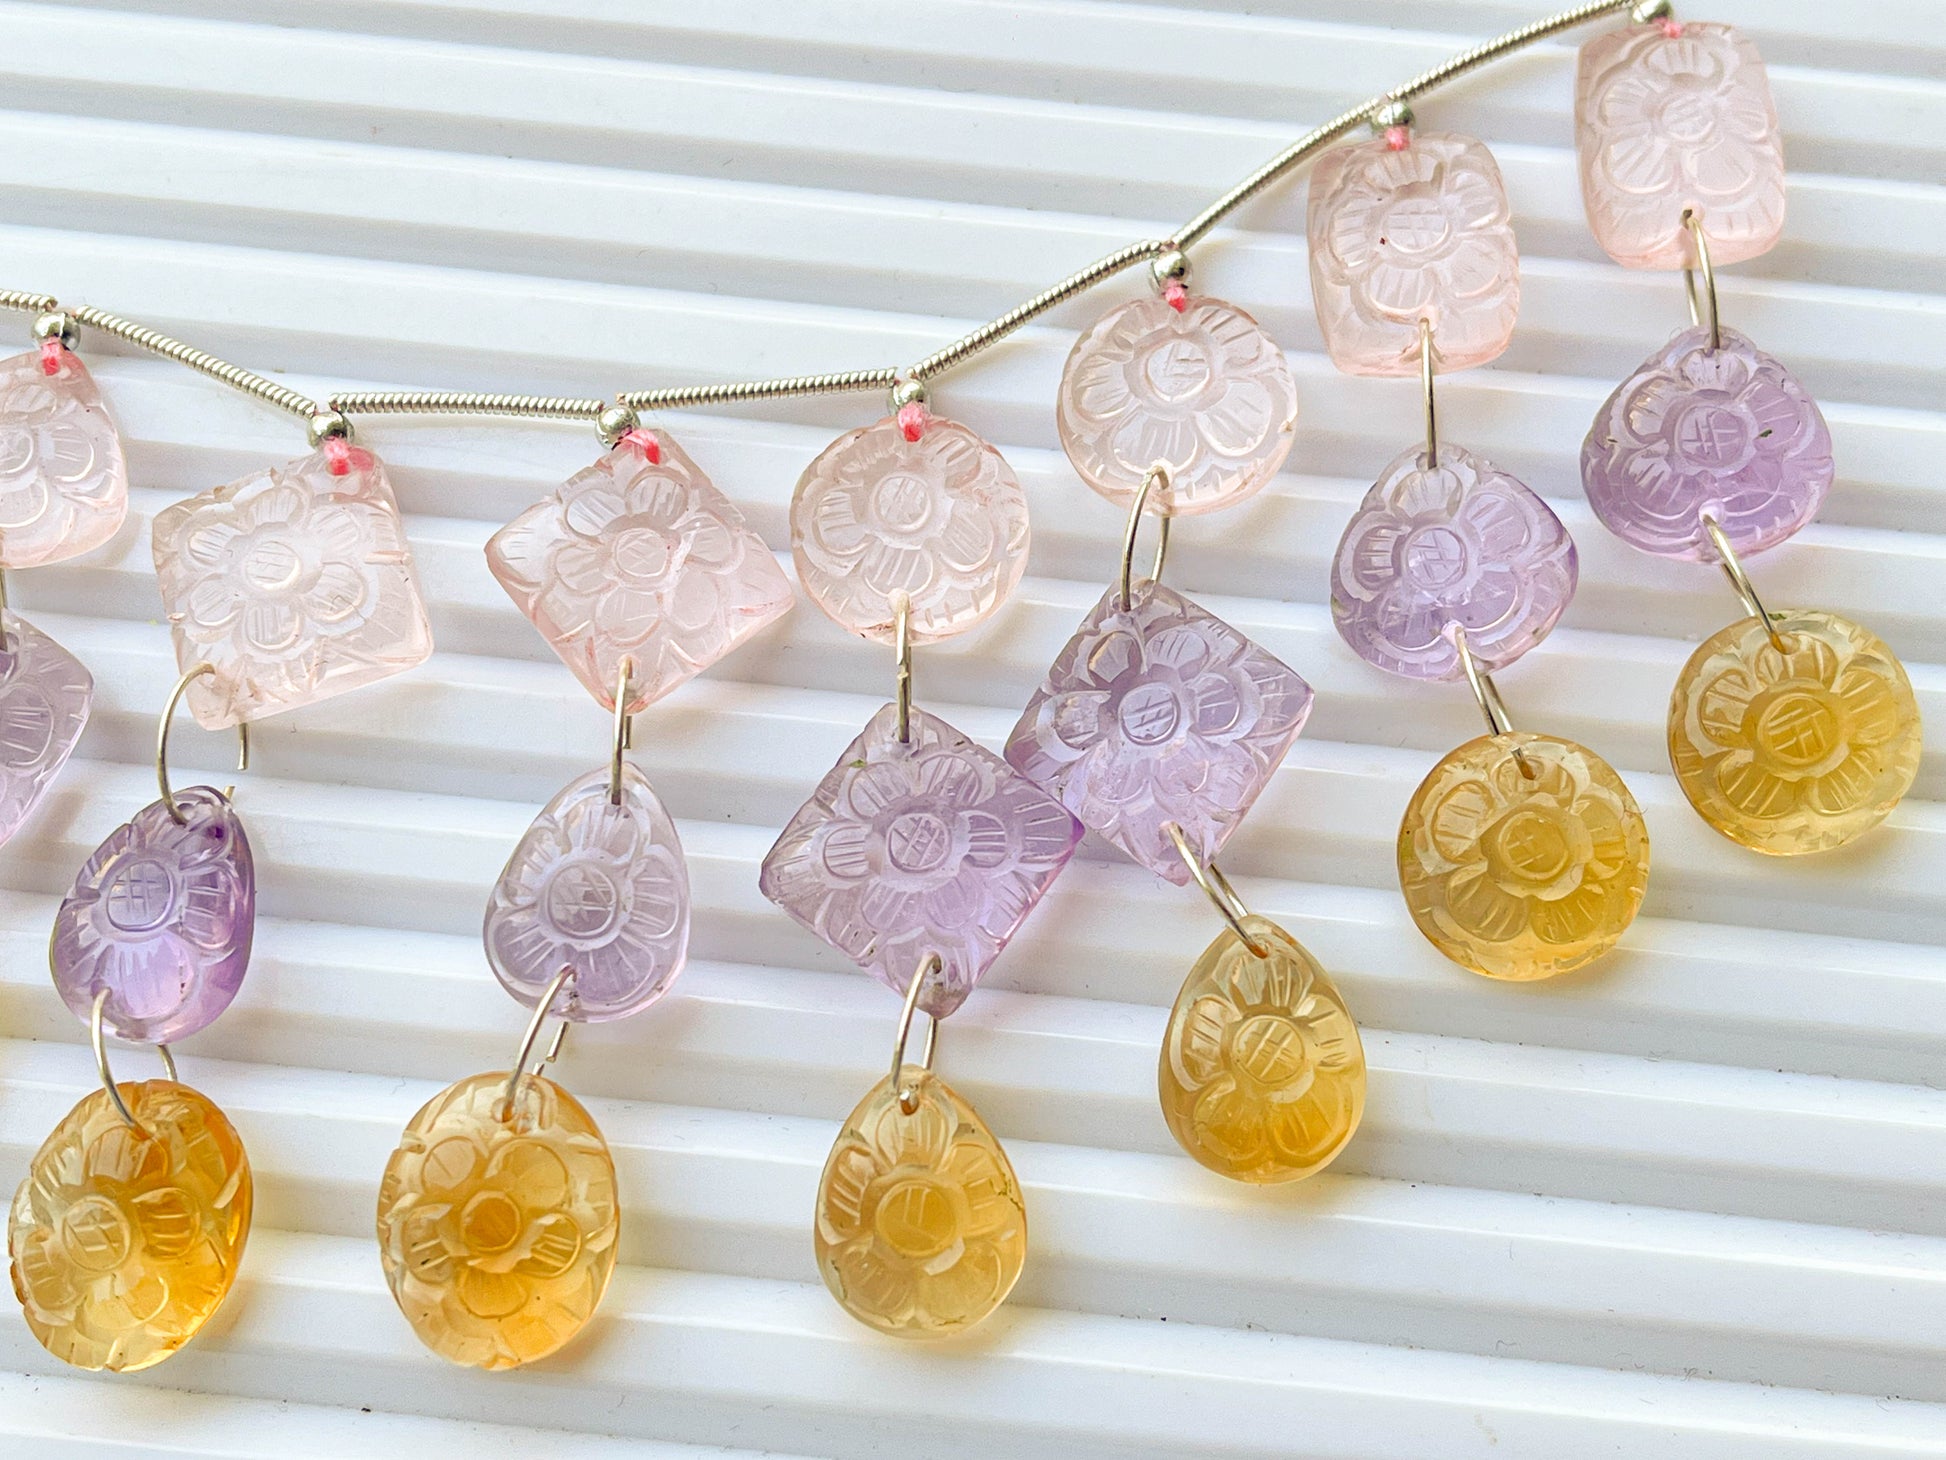 Mix gemstones Rose Quartz, Pink Amethyst, Citrine Carved Double drill pair, Beadsforyourjewelry